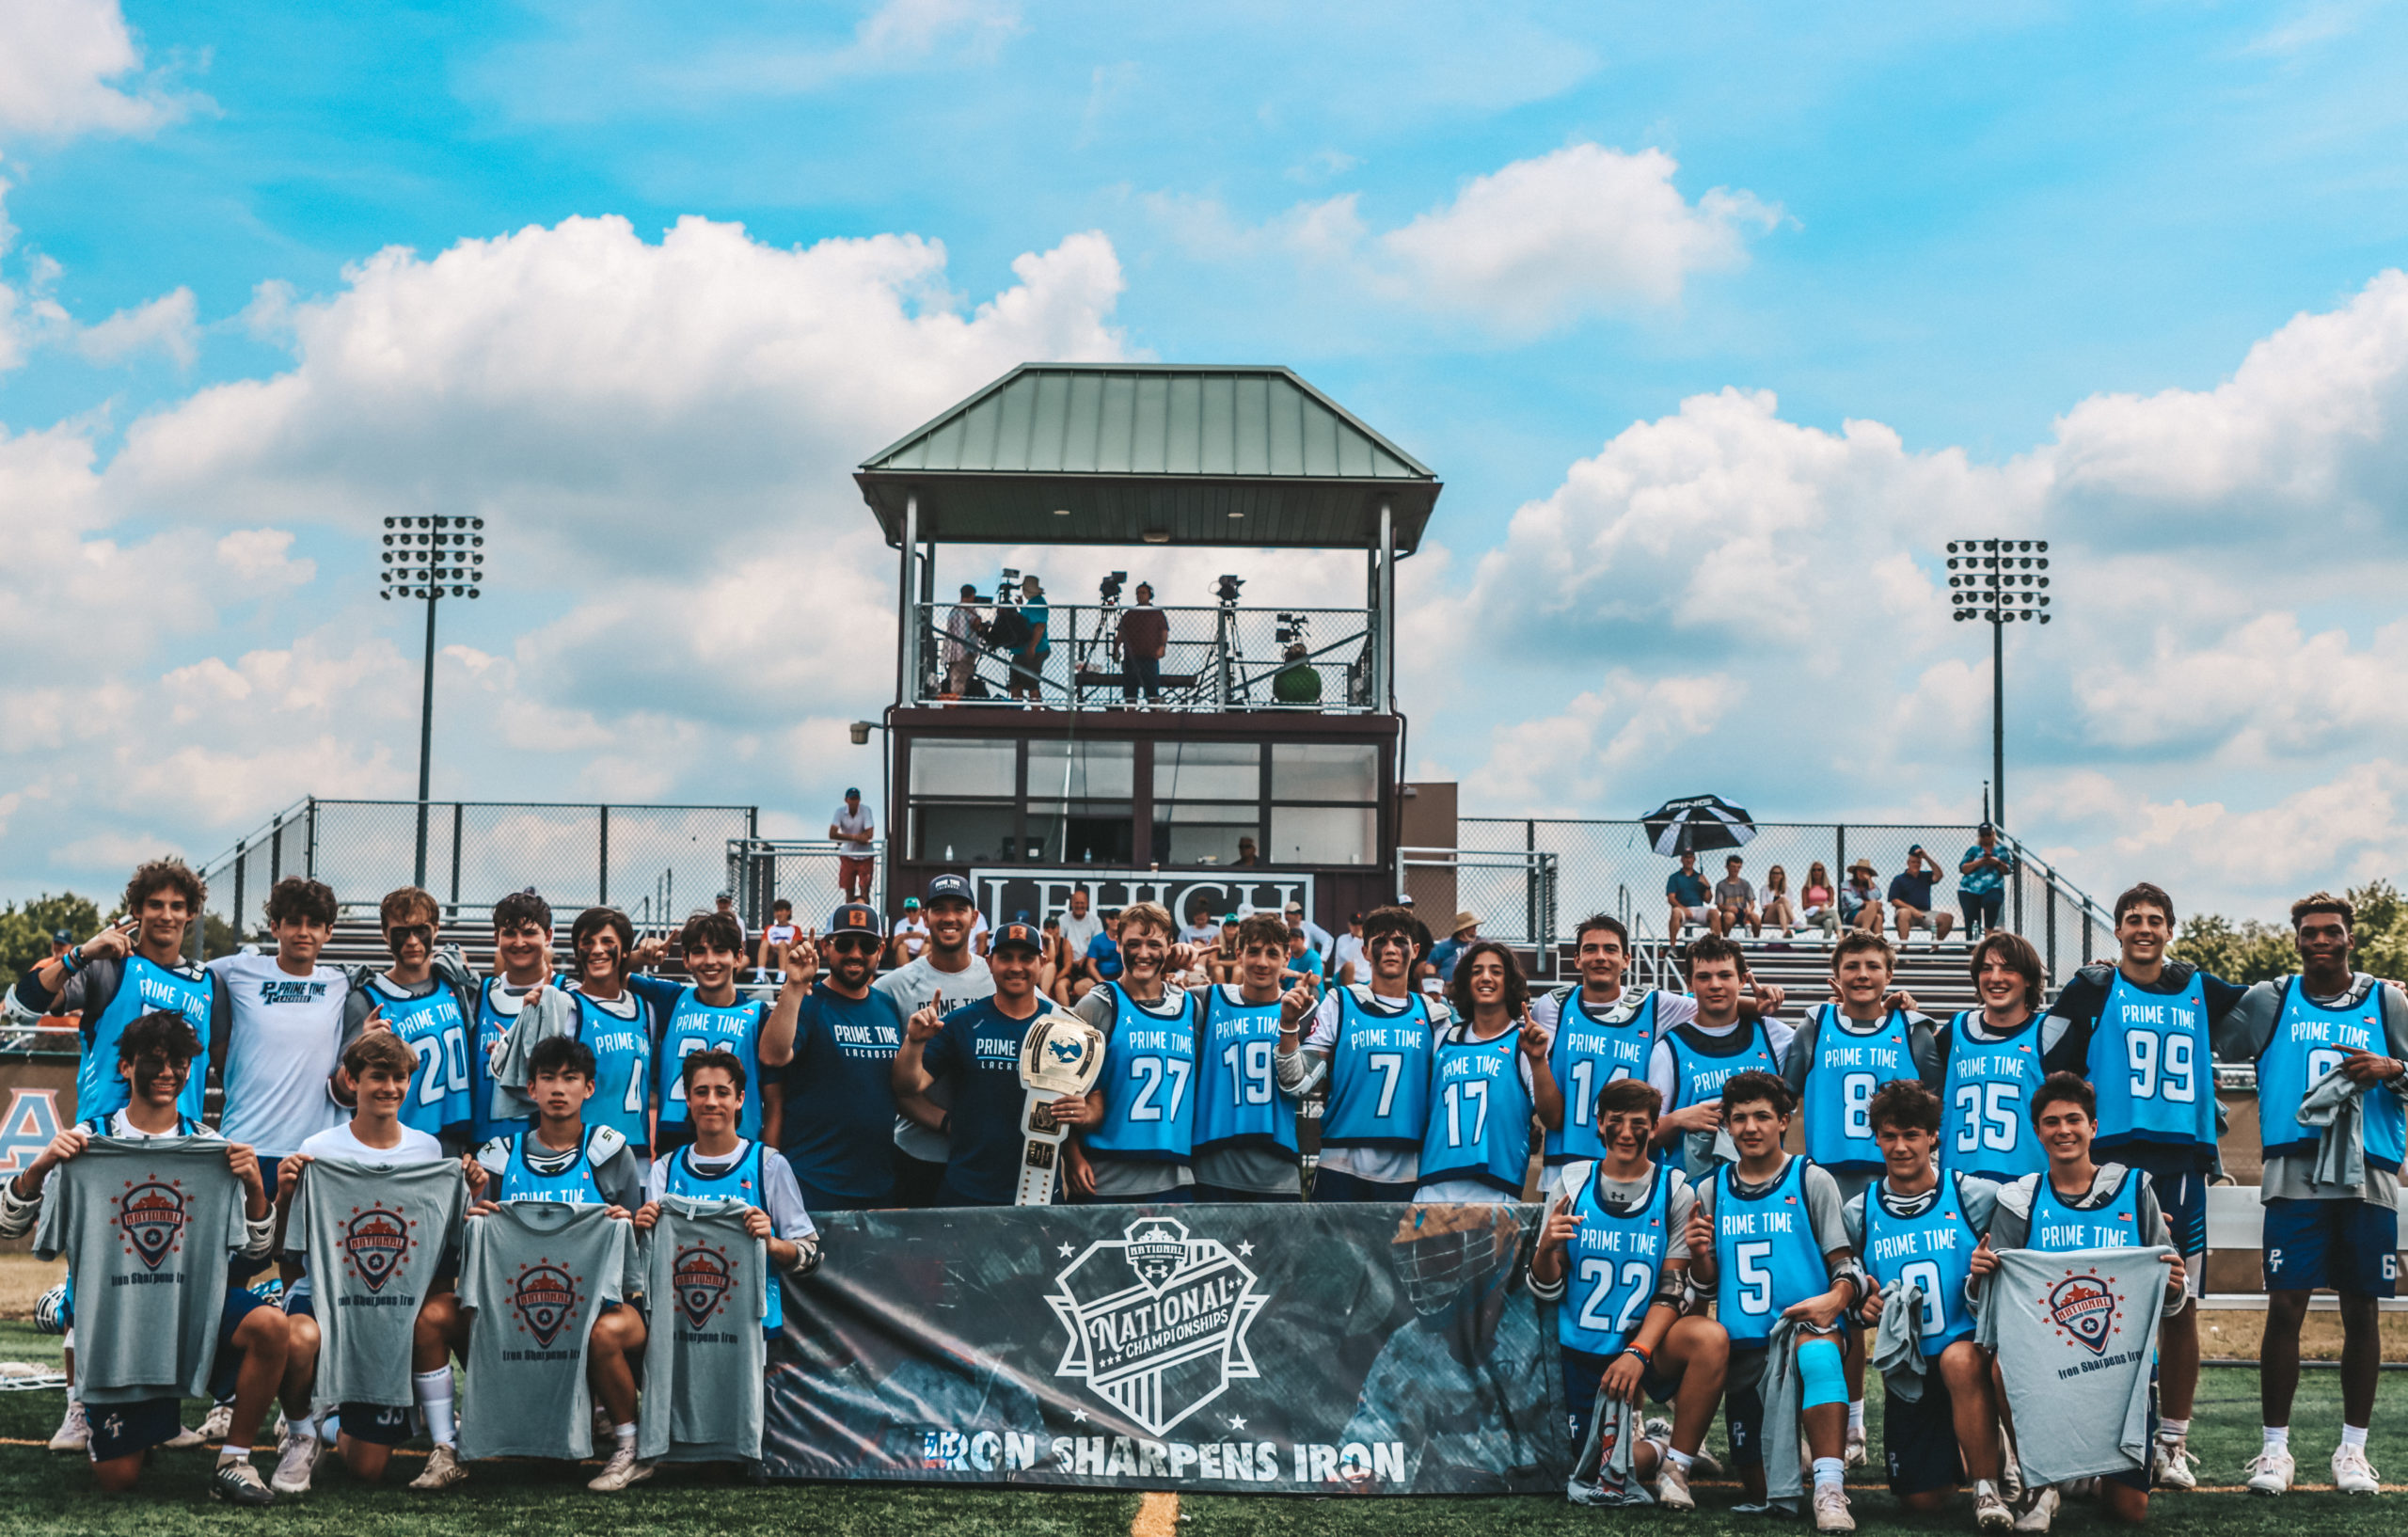 VIDEO HIGHLIGHTS Prime Time Nabs First NLF National Championship at